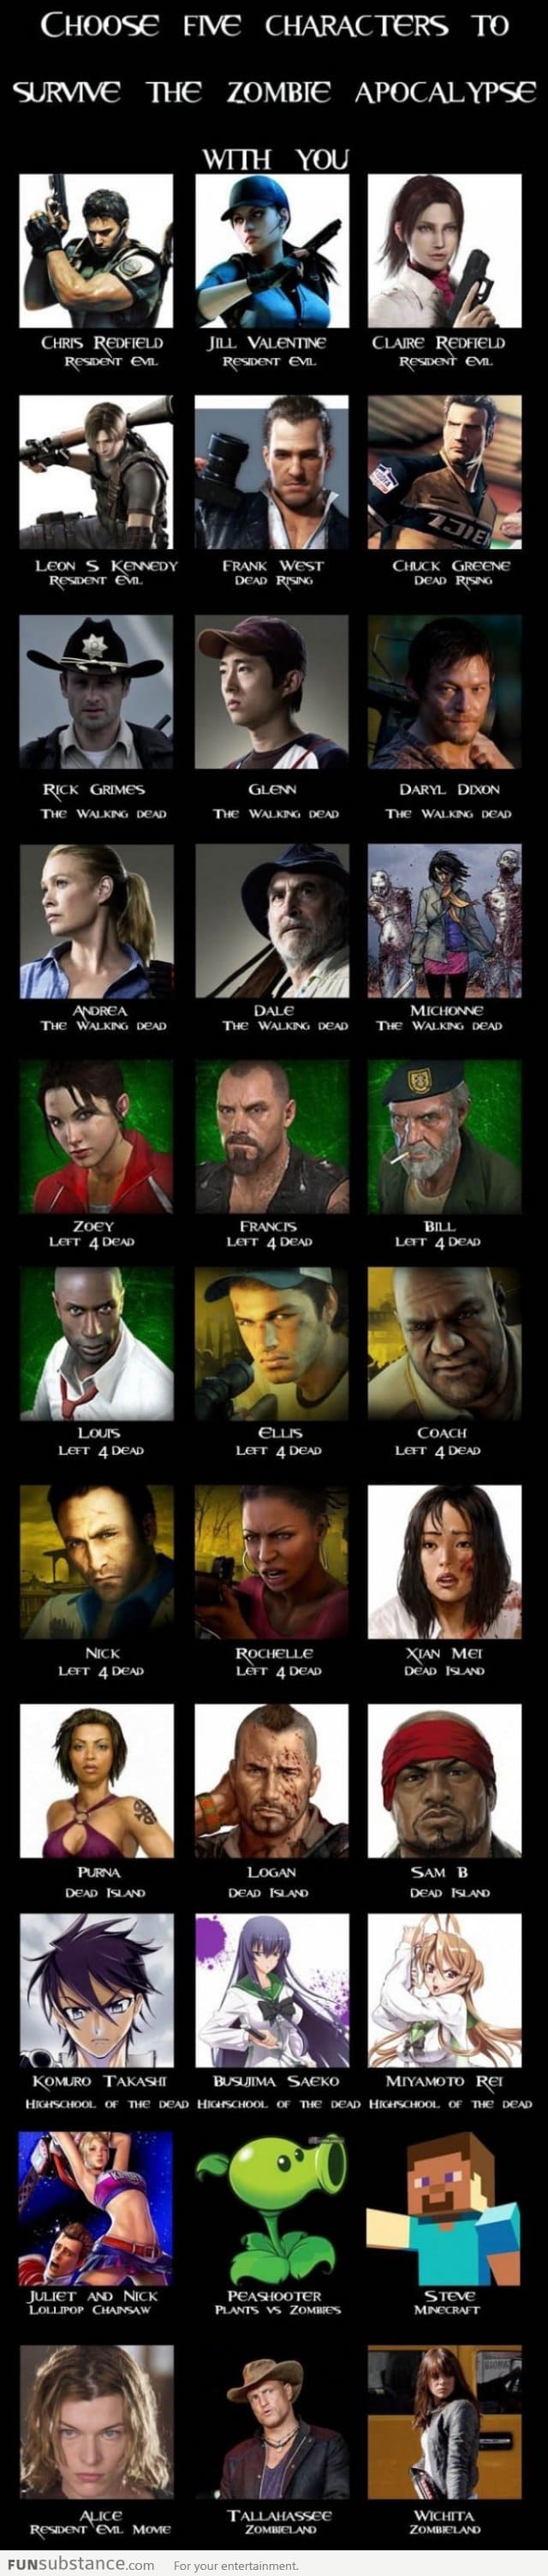 Choose 5 Characters To Survive The Zombie Apocalypse